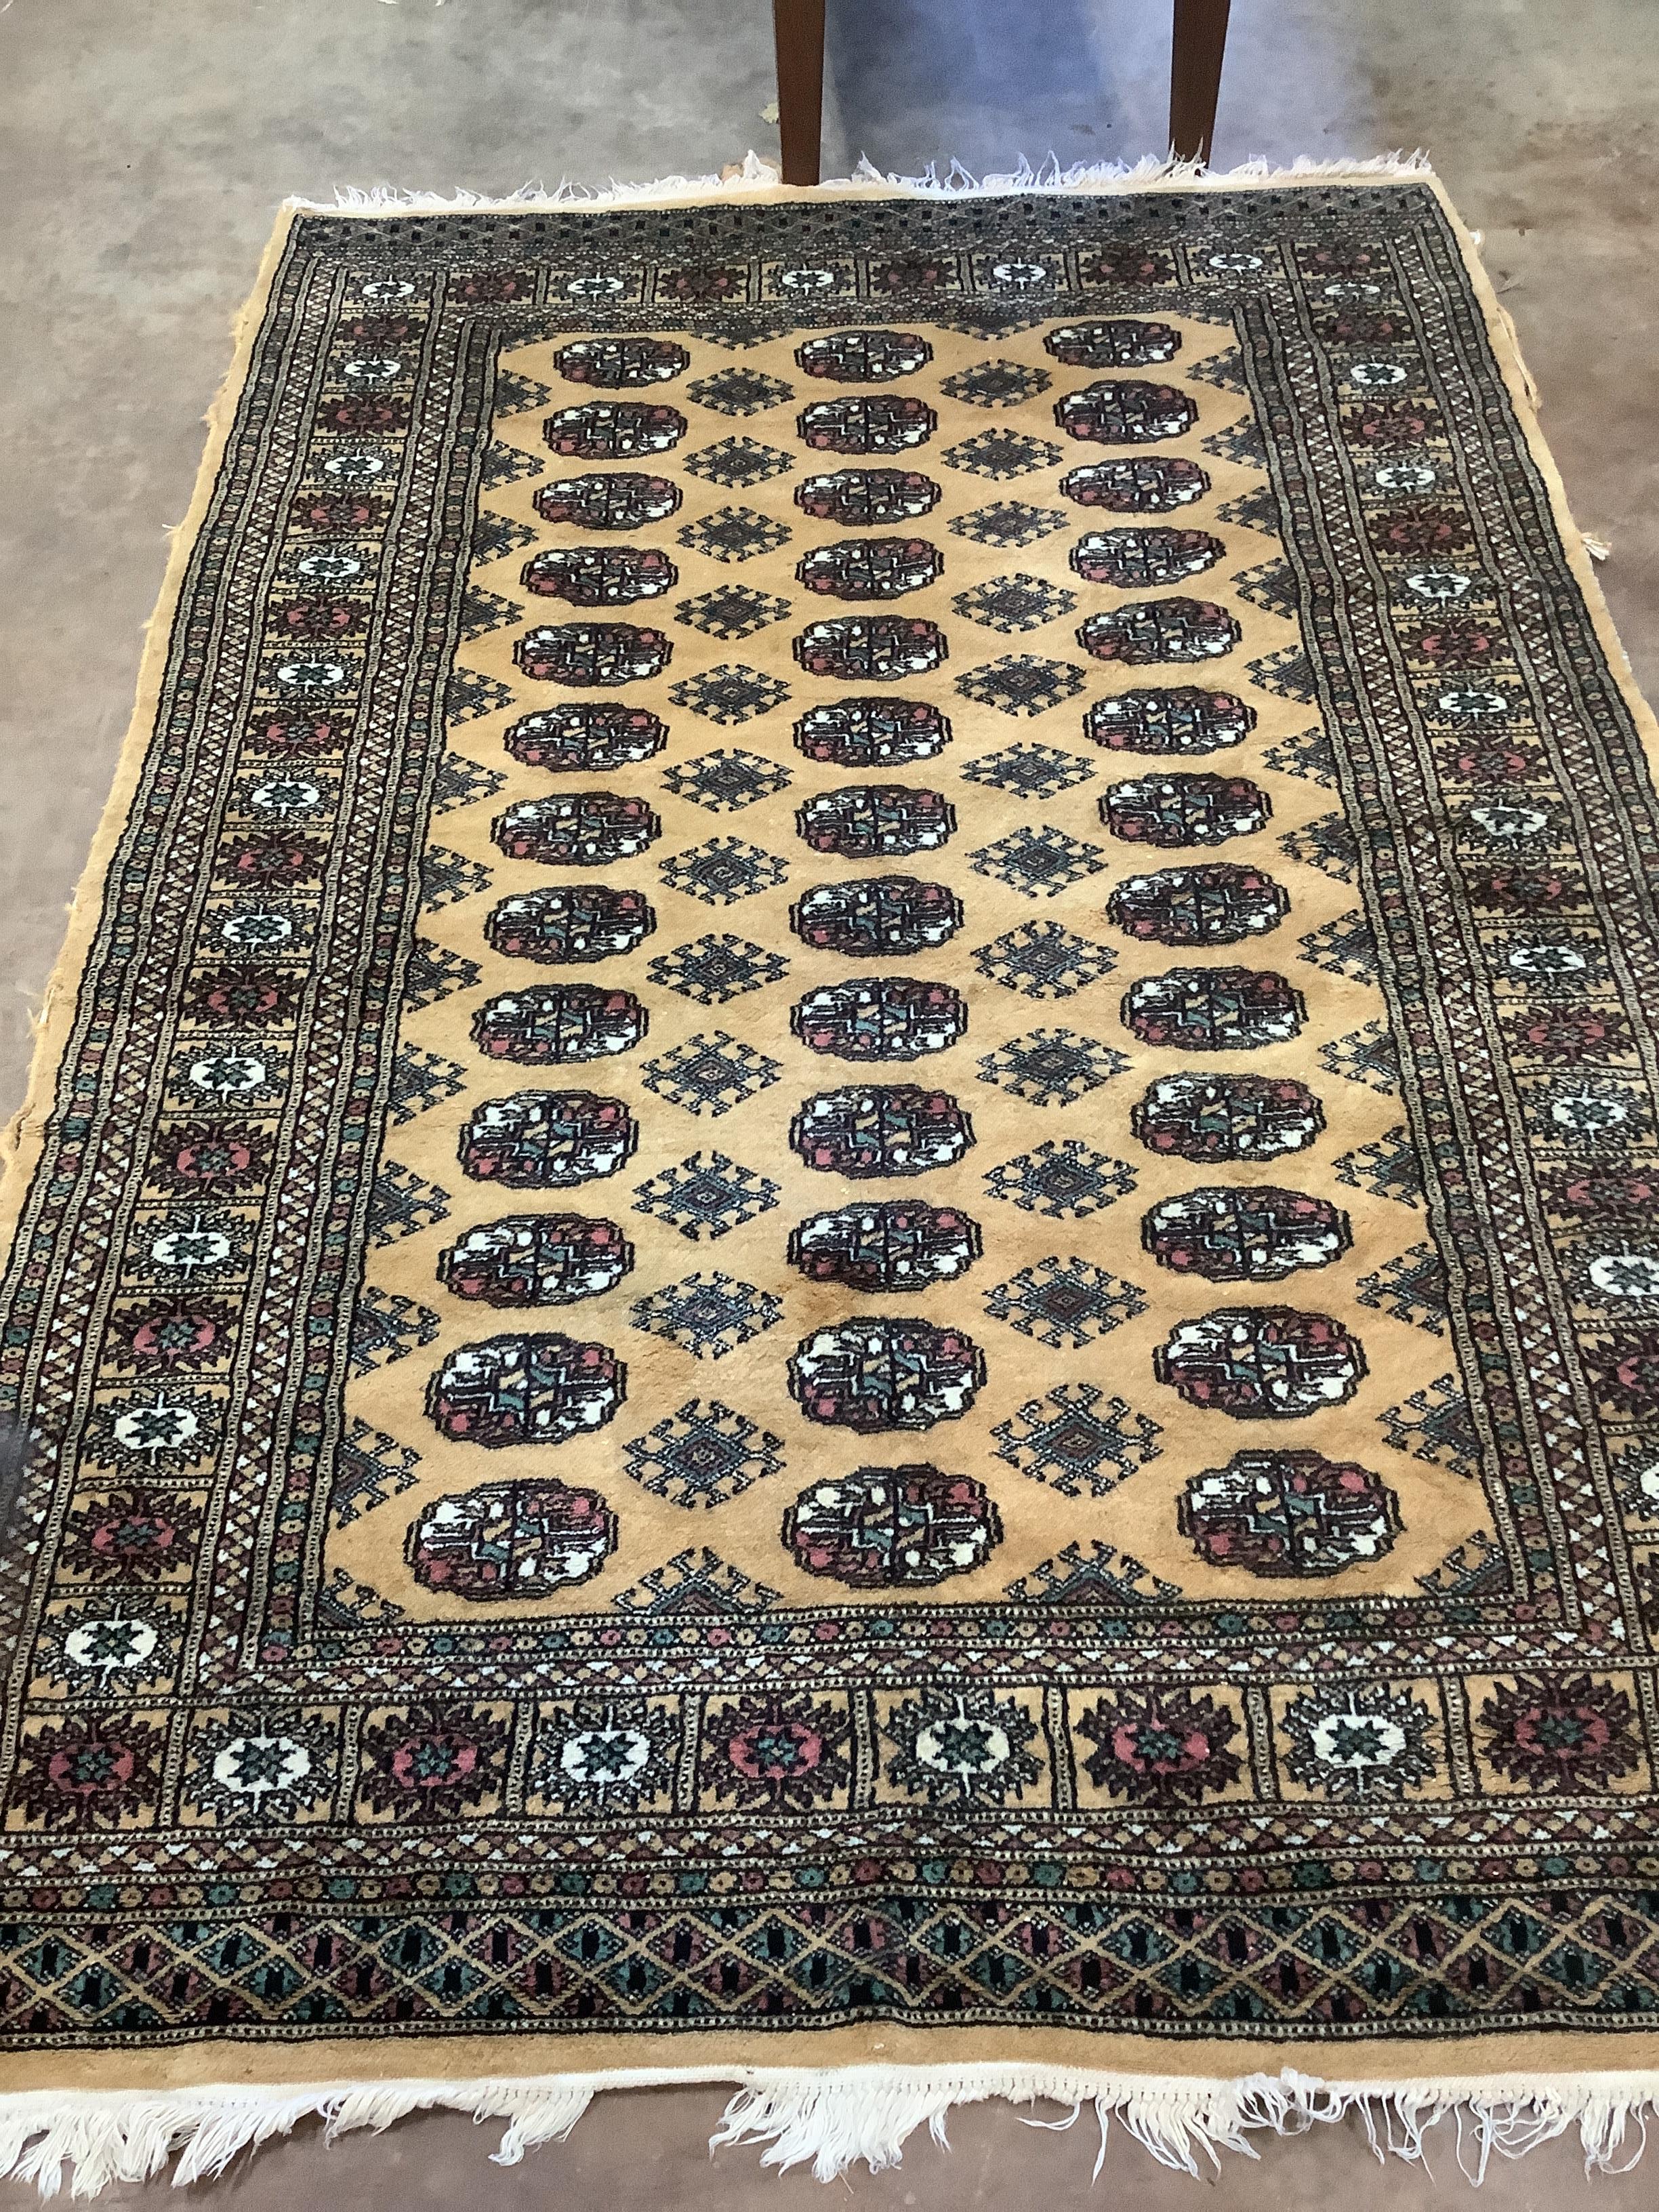 A Bokhara beige ground rug, 183 x 126cm***CONDITION REPORT***PLEASE NOTE:- Prospective buyers are